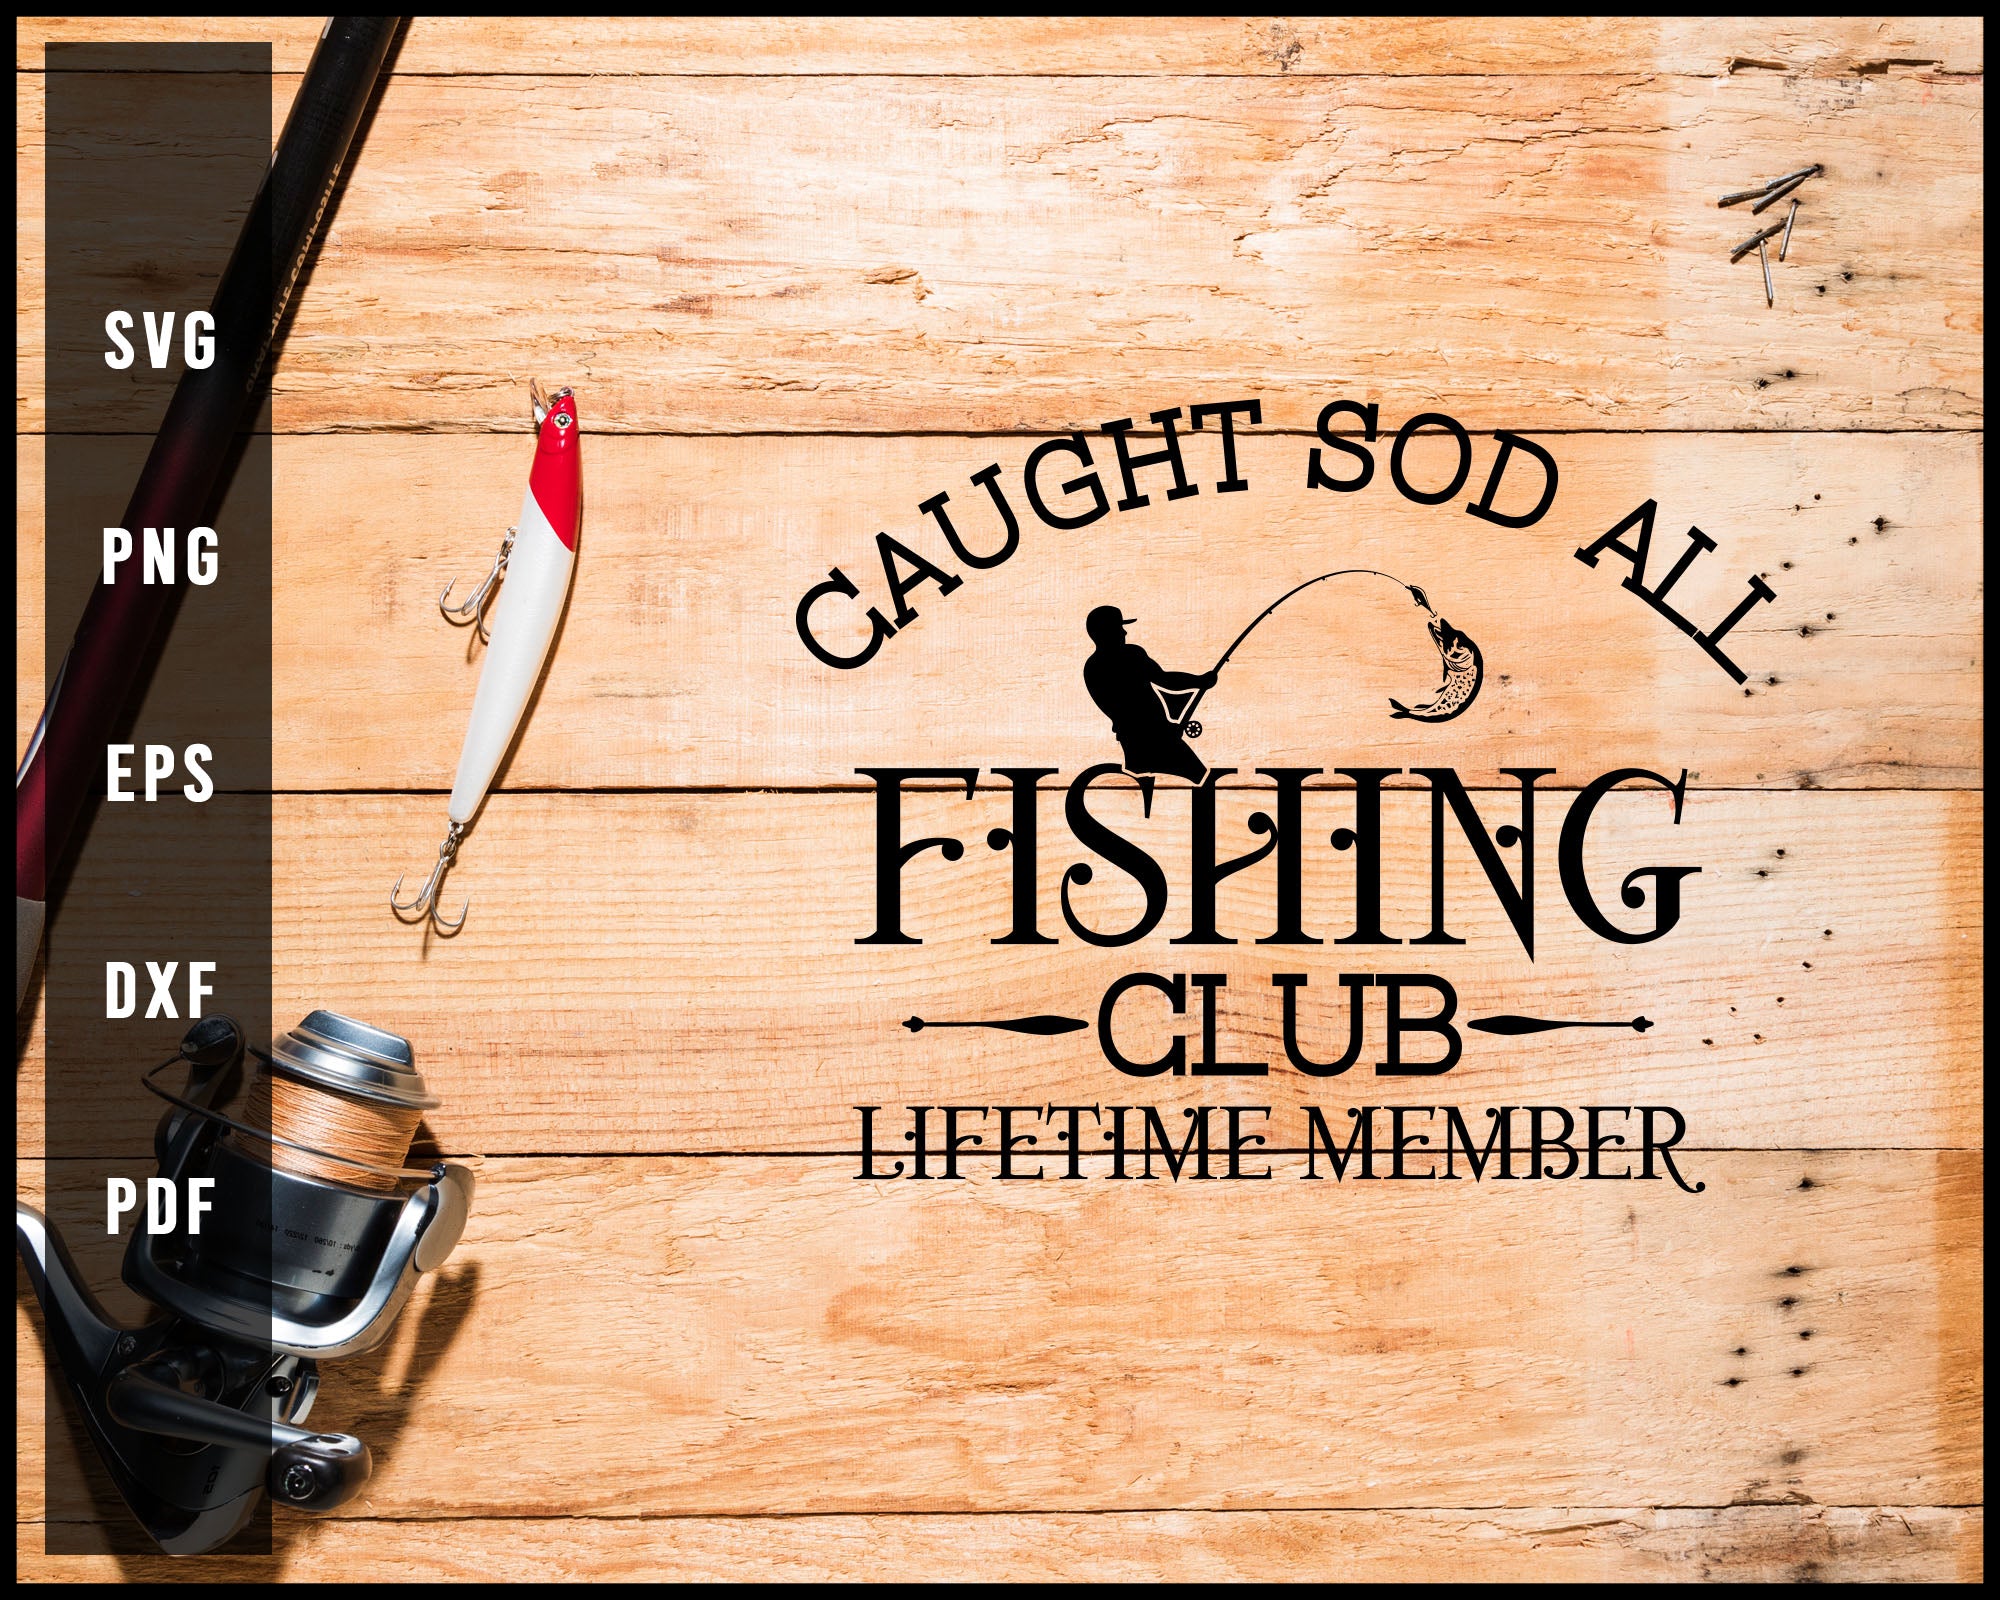 Caught Sod All Fishing Club Lifetime Member svg png Silhouette Designs For Cricut And Printable Files